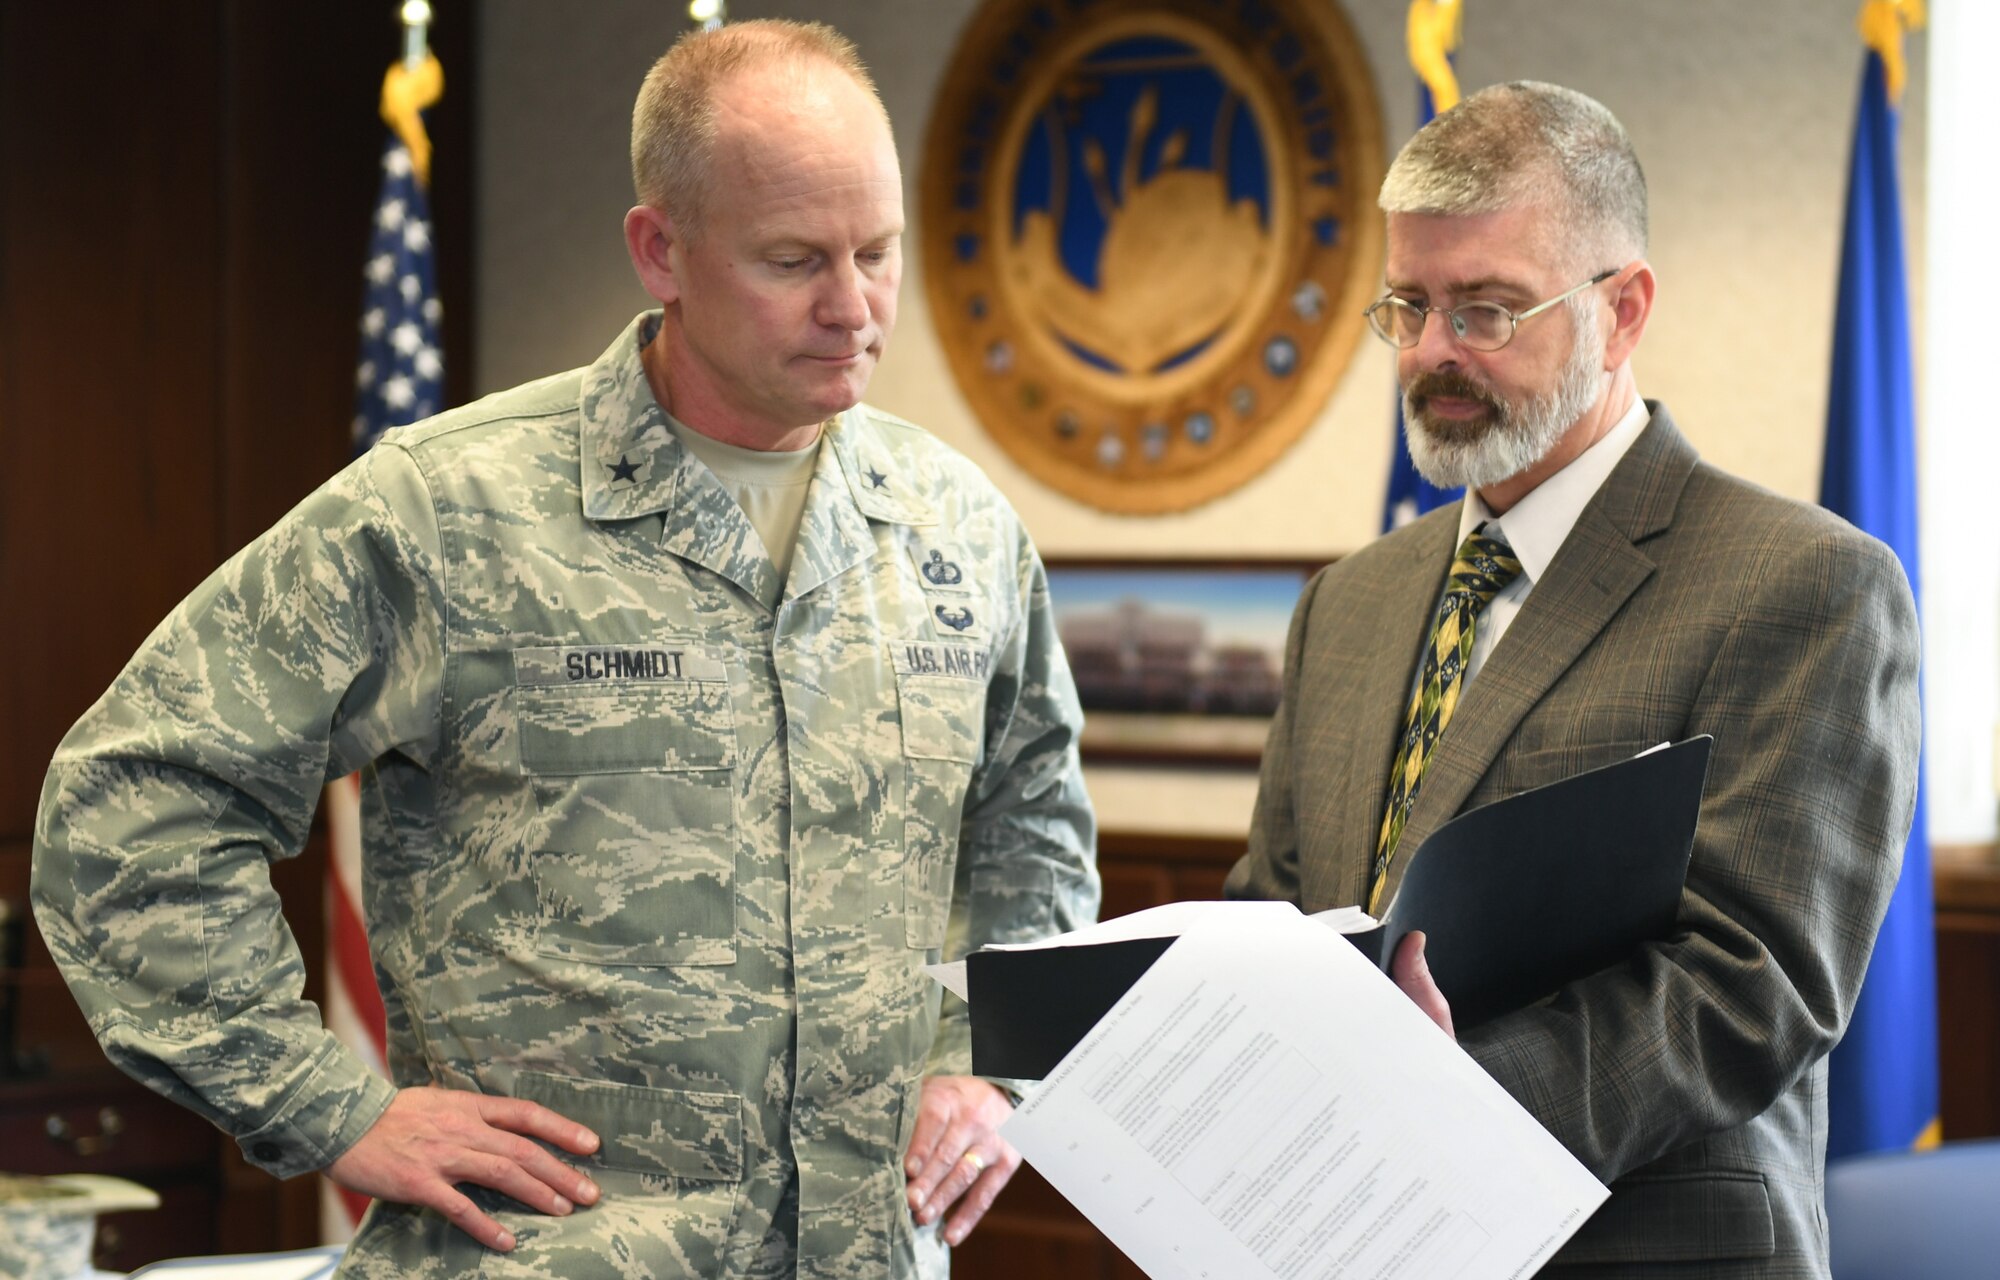 Program Executive Officer for Command, Control, Communications, Intelligence and Networks Brig. Gen. Michael Schmidt looks over acquisition strategies with his deputy, Scott Owens, at Hanscom Air Force Base, Mass., Friday, May 18. Schmidt and Owens recently took over leadership of the C3I&N directorate in April and say they are working towards enabling a workforce which acquires systems at the speed technology evolves. (U.S. Air Force Photo by Todd Maki)